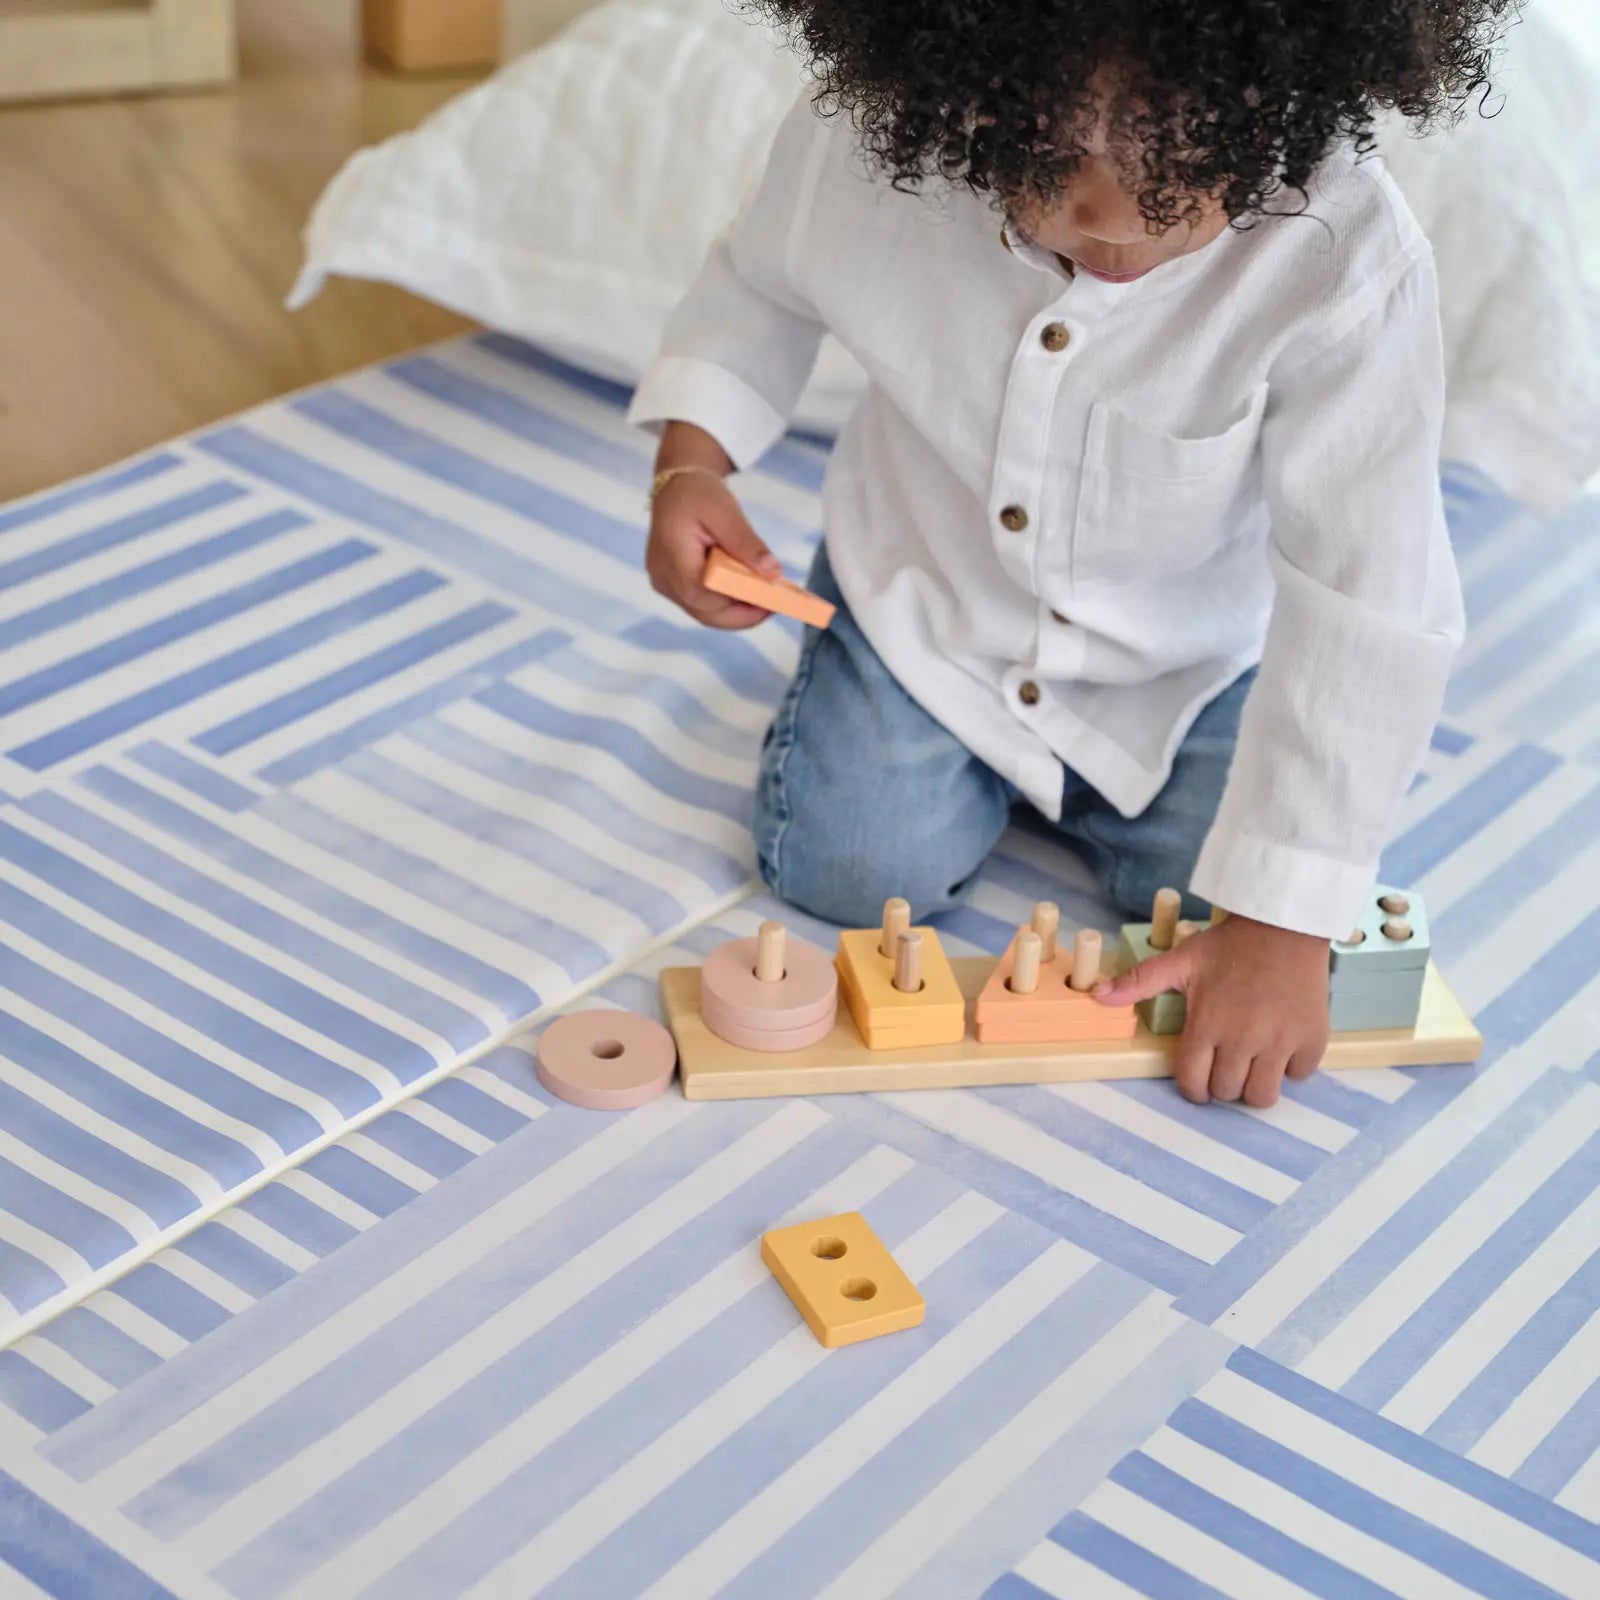 French blue and white inverted stripe tumbling mat shown with toddler playing with rainbow wooden toy on the mat with a pillow behind him